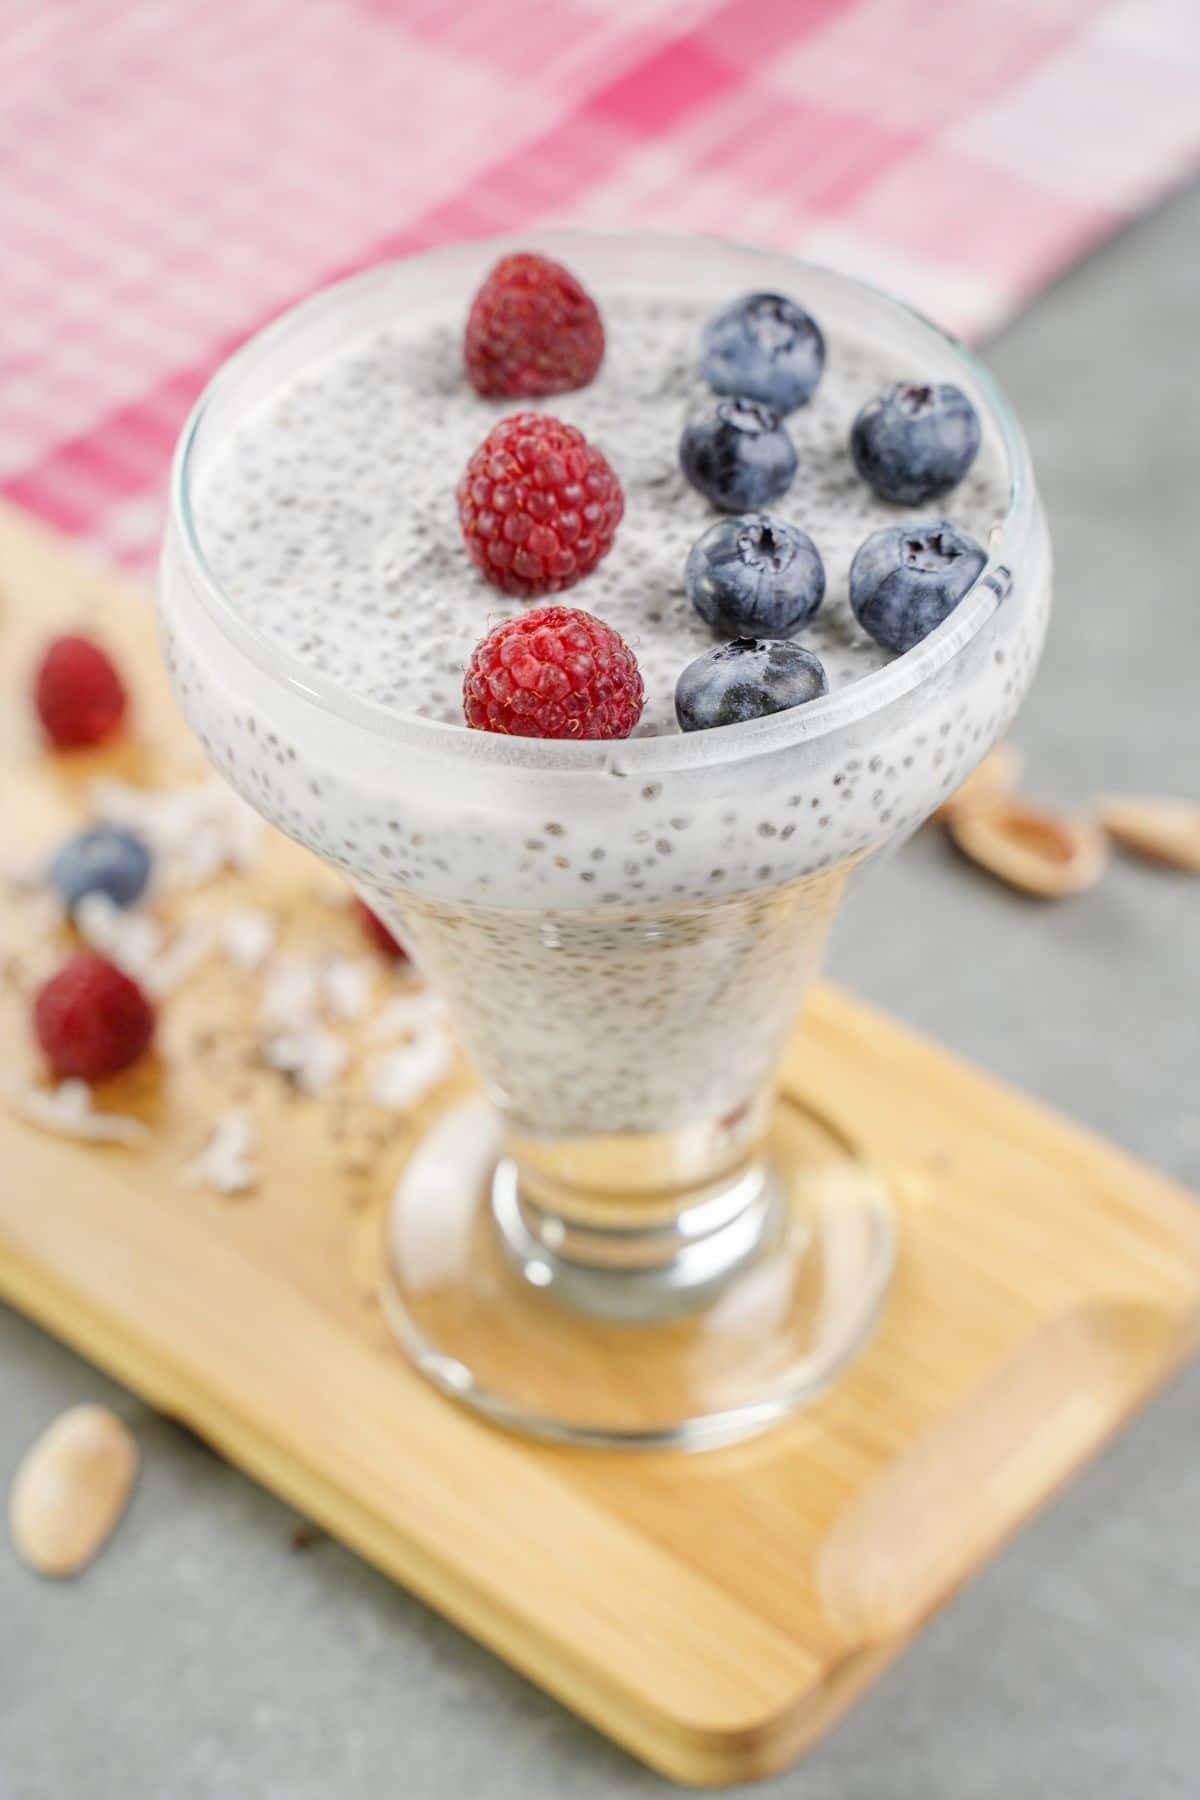 No-Bake Chia Pudding served with some fresh berries